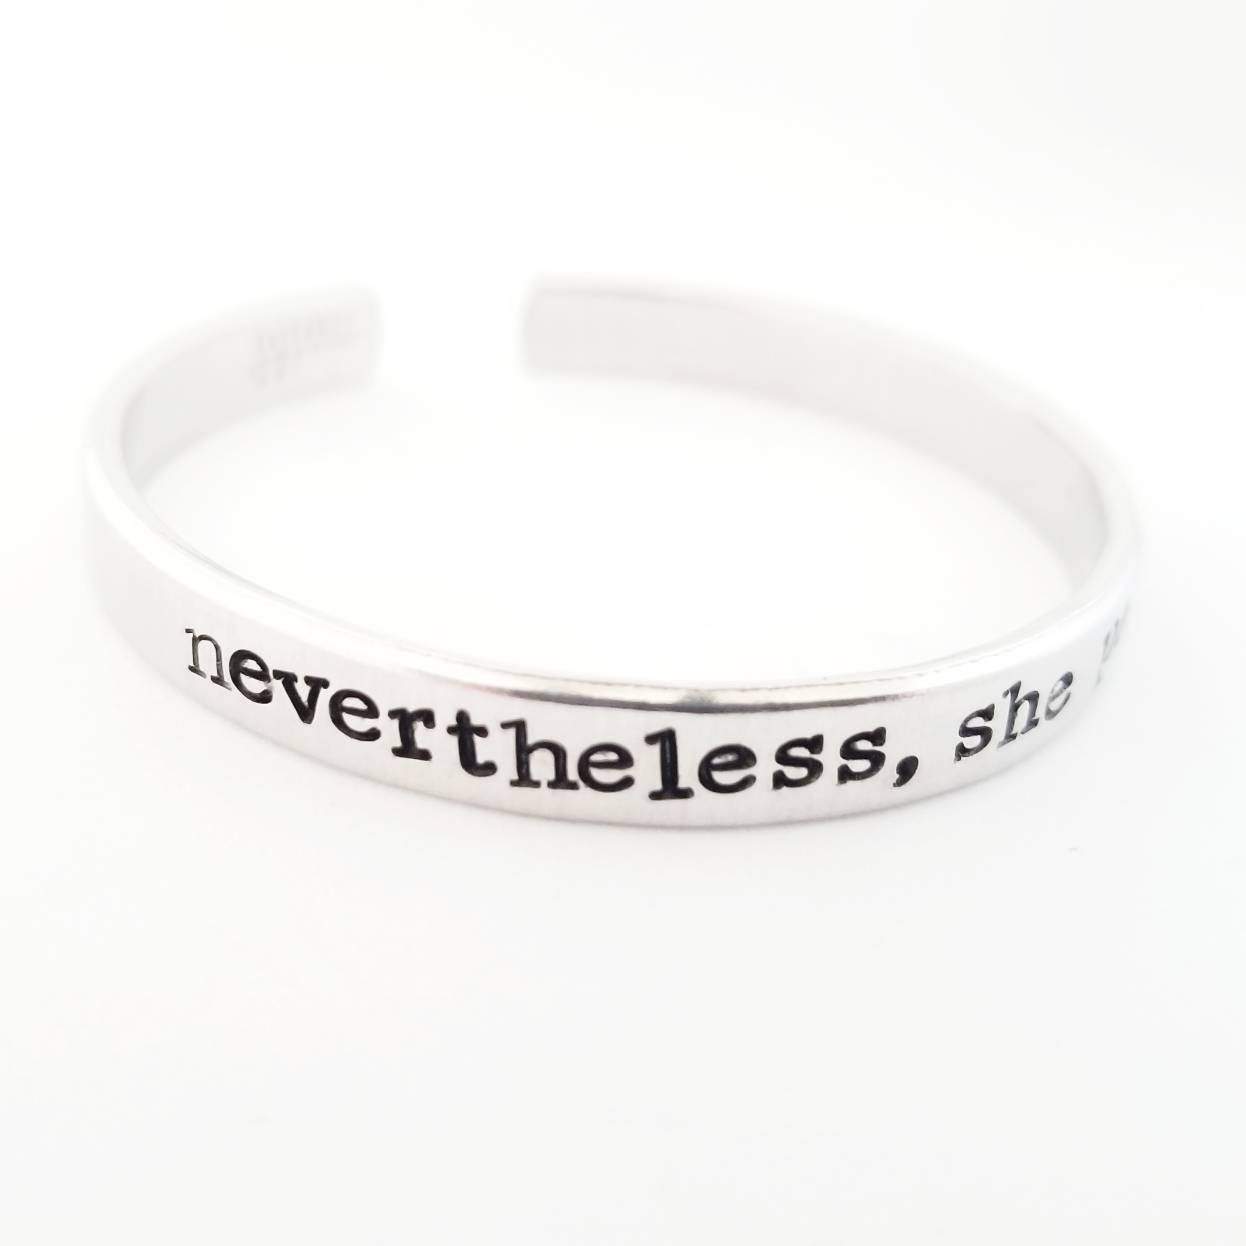 NEVERTHELESS, SHE PERSISTED Stacking Cuff Bracelet Salt and Sparkle